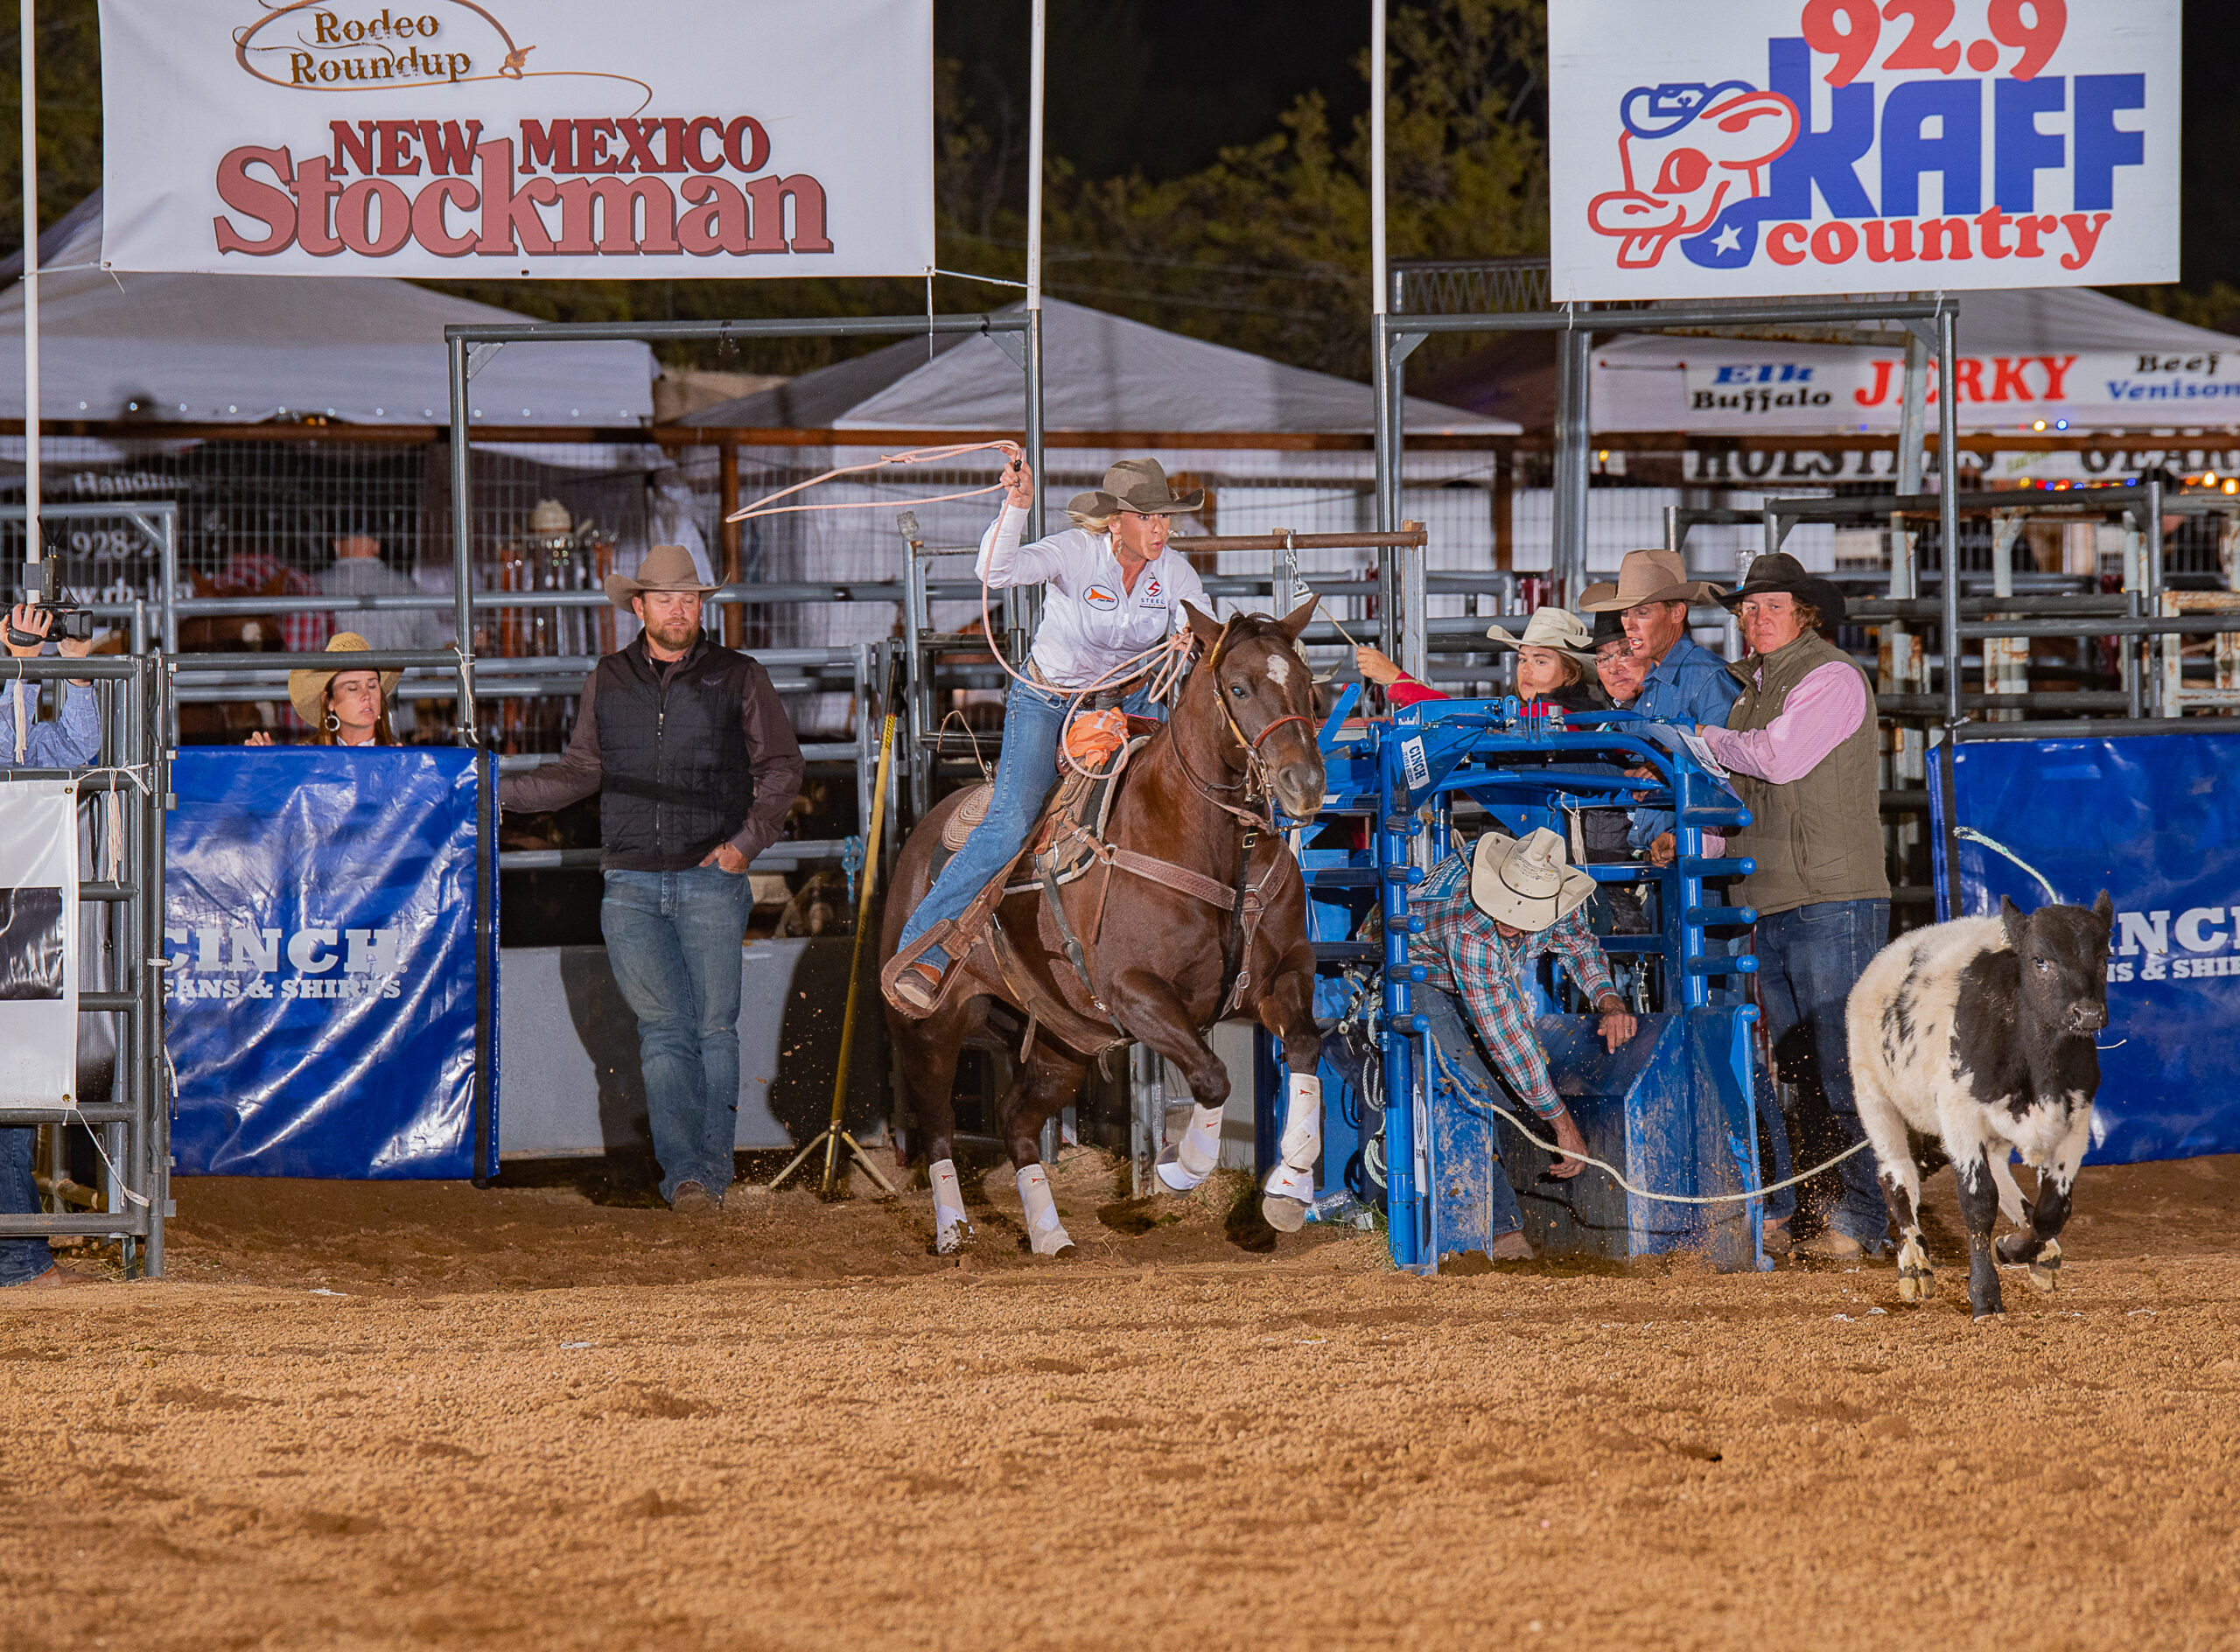 Turquoise Circuit Finals Rodeo 2022 Cowboy Lifestyle Network